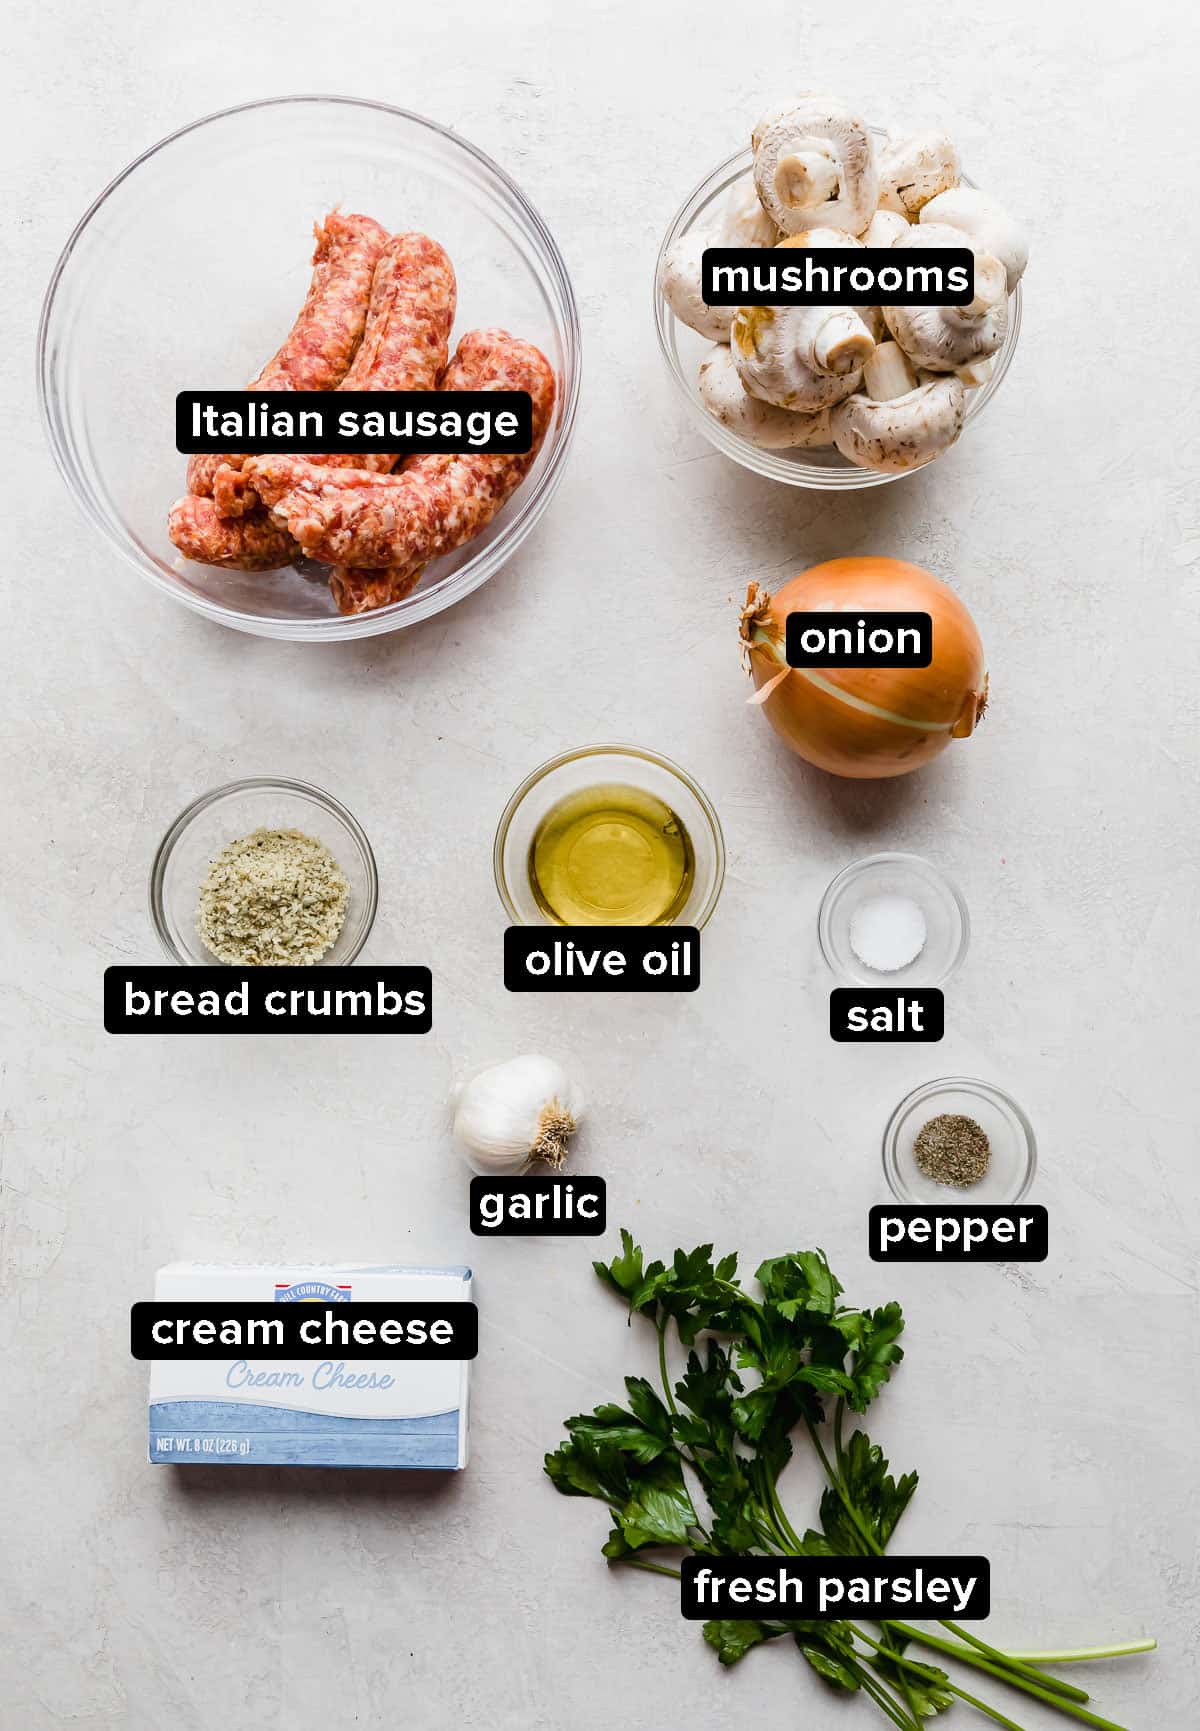 Italian Sausage Stuffed Mushrooms ingredients laid out on a gray background.